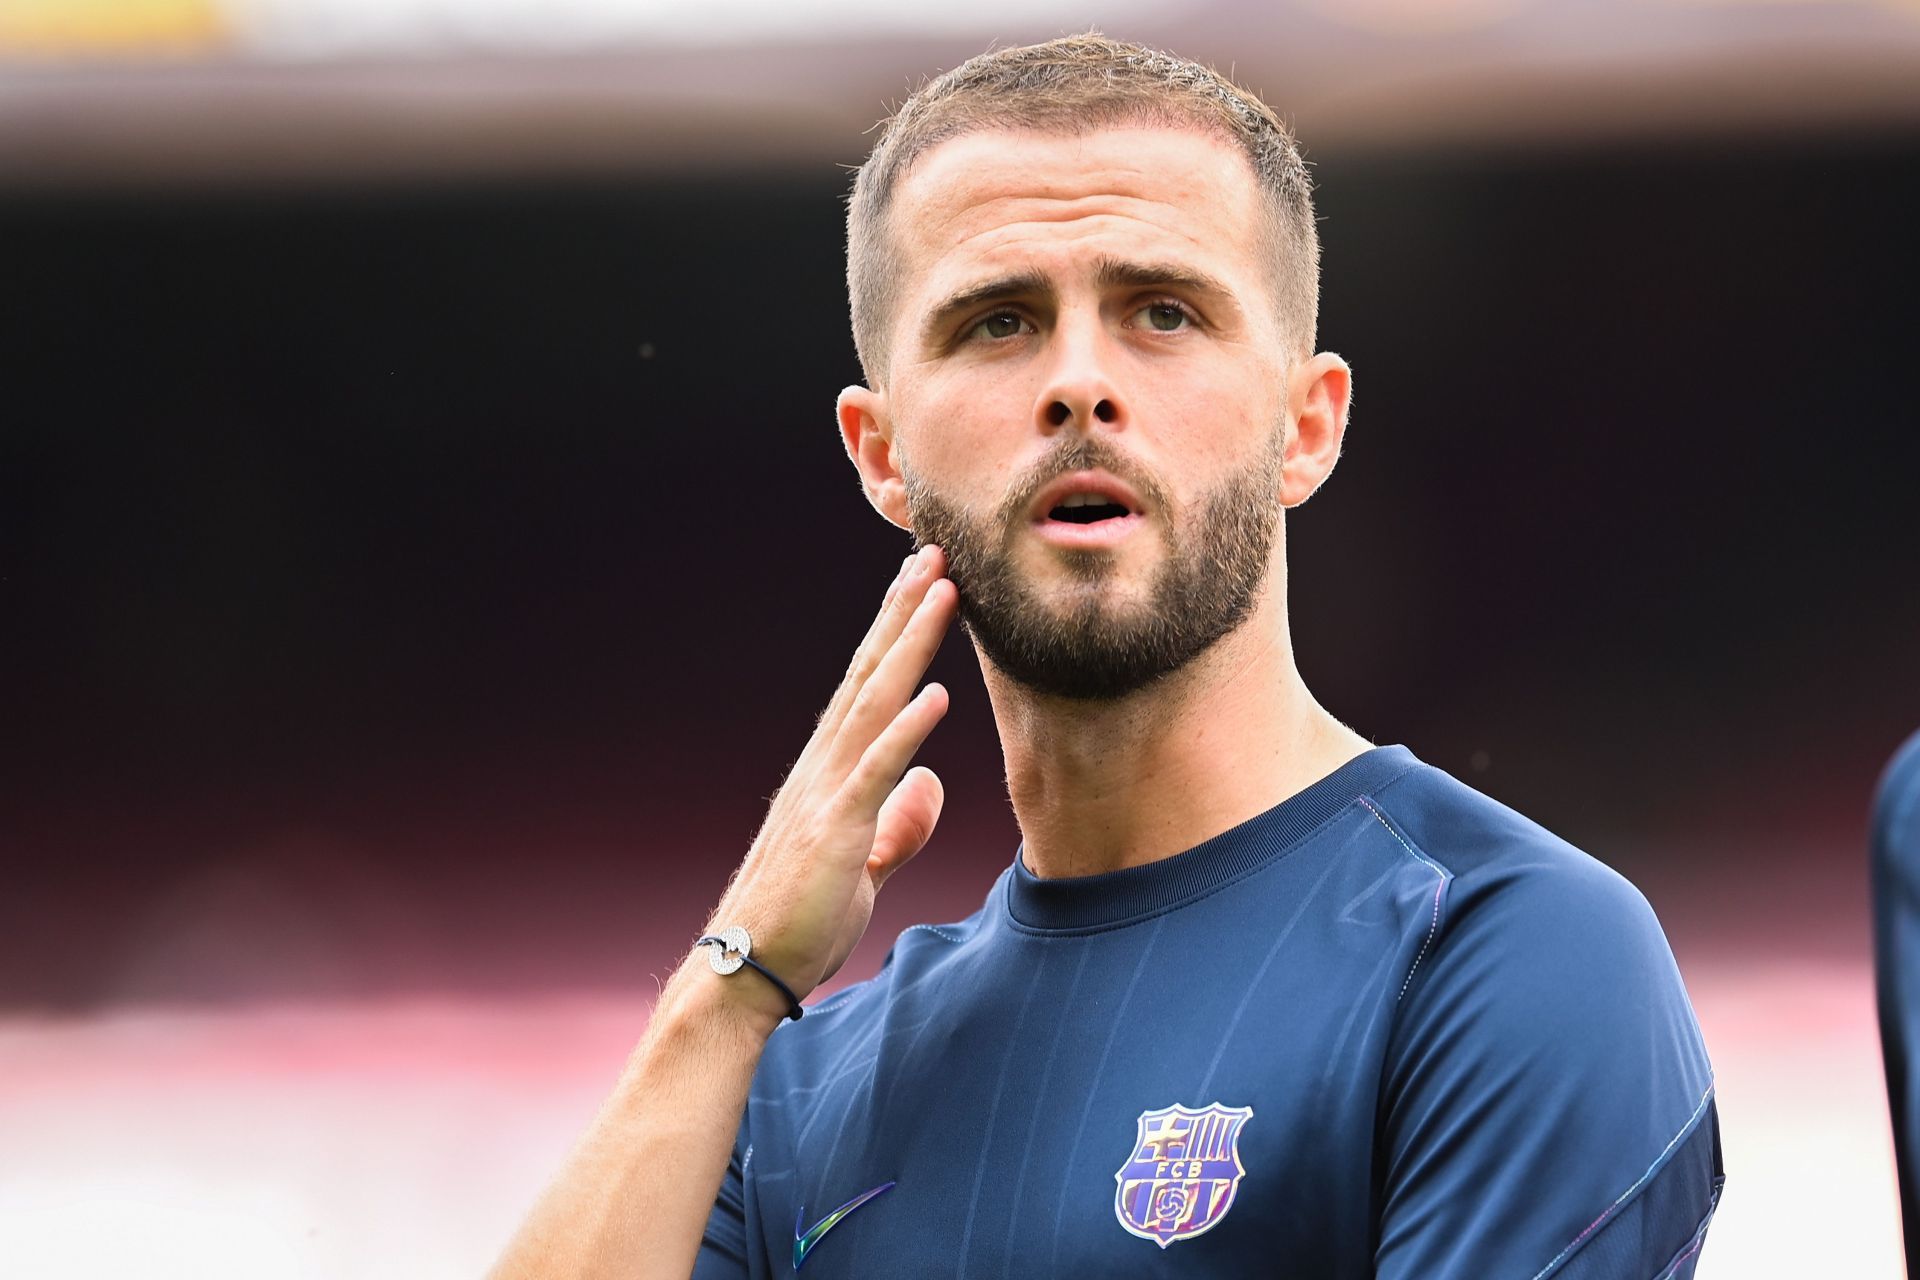 Miralem Pjanic is likely to leave the Camp Nou this summer.